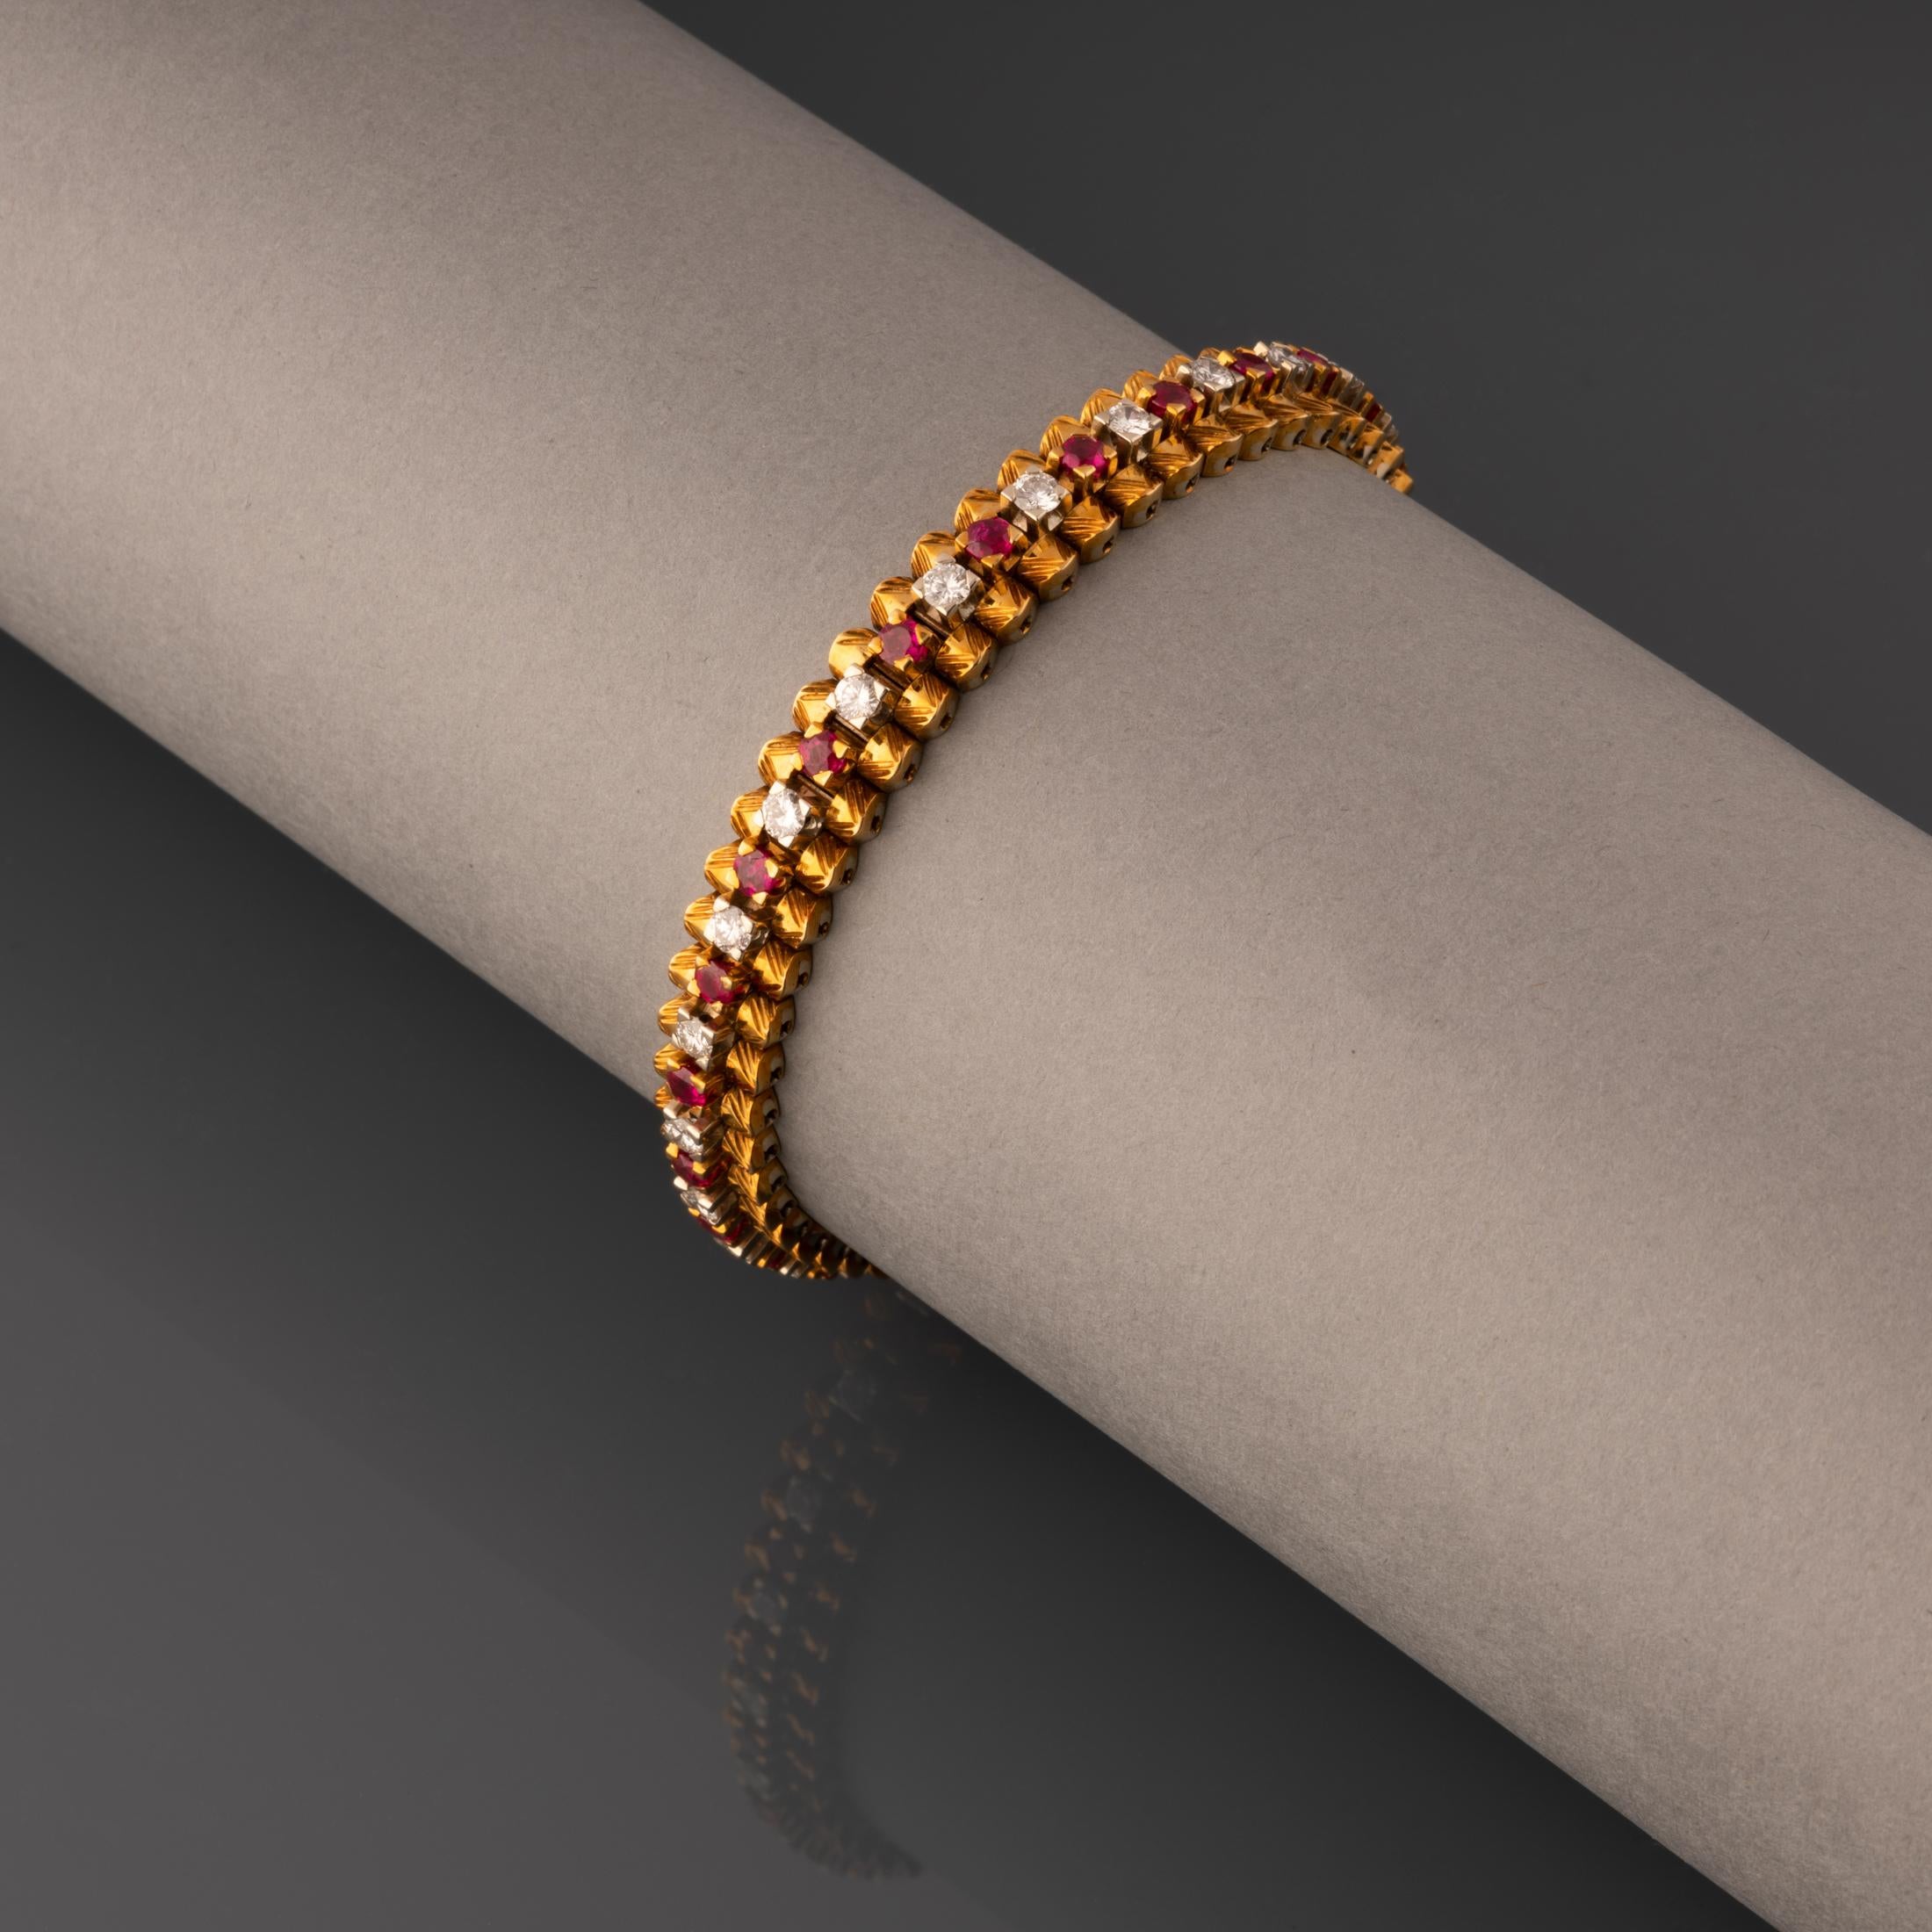 A very lovely retro bracelet, European made circa 1960.

Made in yellow gold 18K and set with diamonds (2.50 carats approximately) and rubies(2.50 carats approx).

Length: 18cm

Width: 8mm

Weight: 41.30 grams